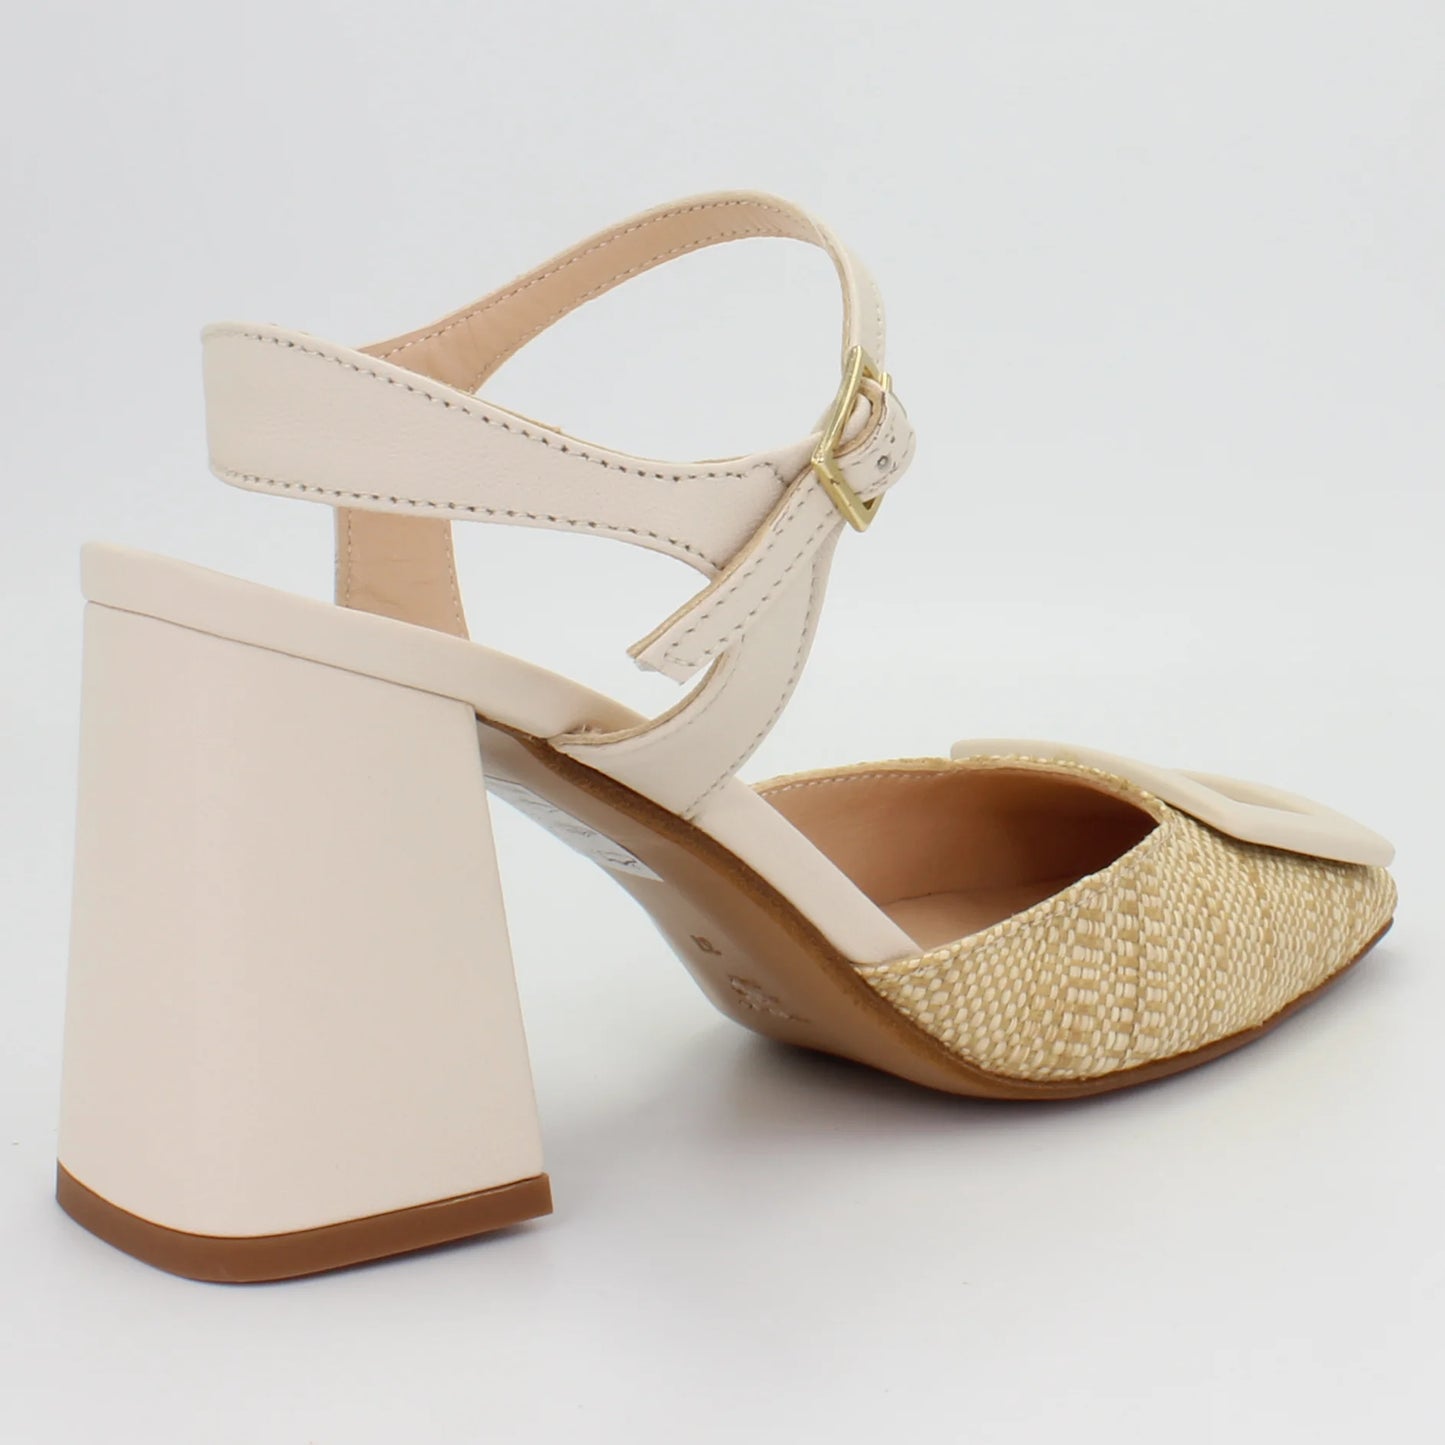 Shop Handmade Italian Leather Block Heel in Raffia Natur (MP17102) or browse our range of hand-made Italian shoes for women in leather or suede in-store at Aliverti Cape Town, or shop online. We deliver in South Africa & offer multiple payment plans as well as accept multiple safe & secure payment methods.